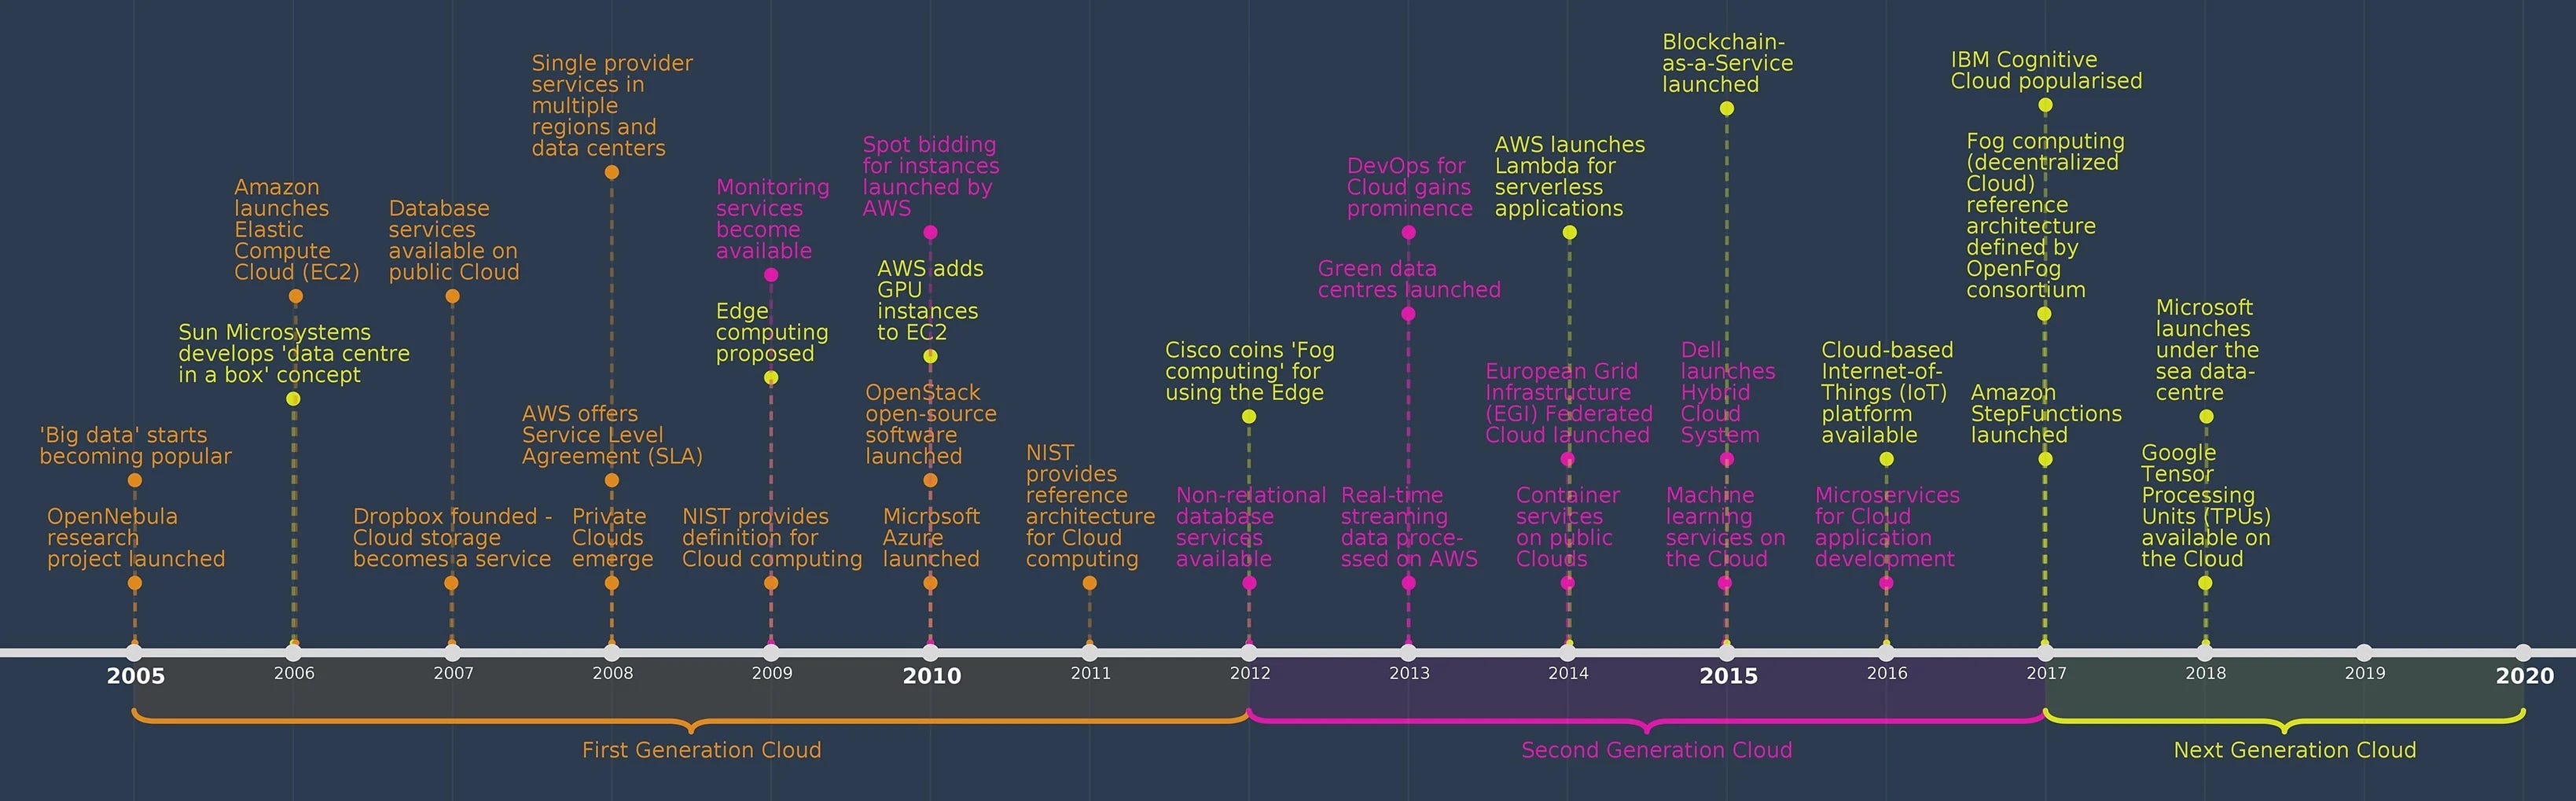 History of the cloud. Source: Chartered Institute for IT